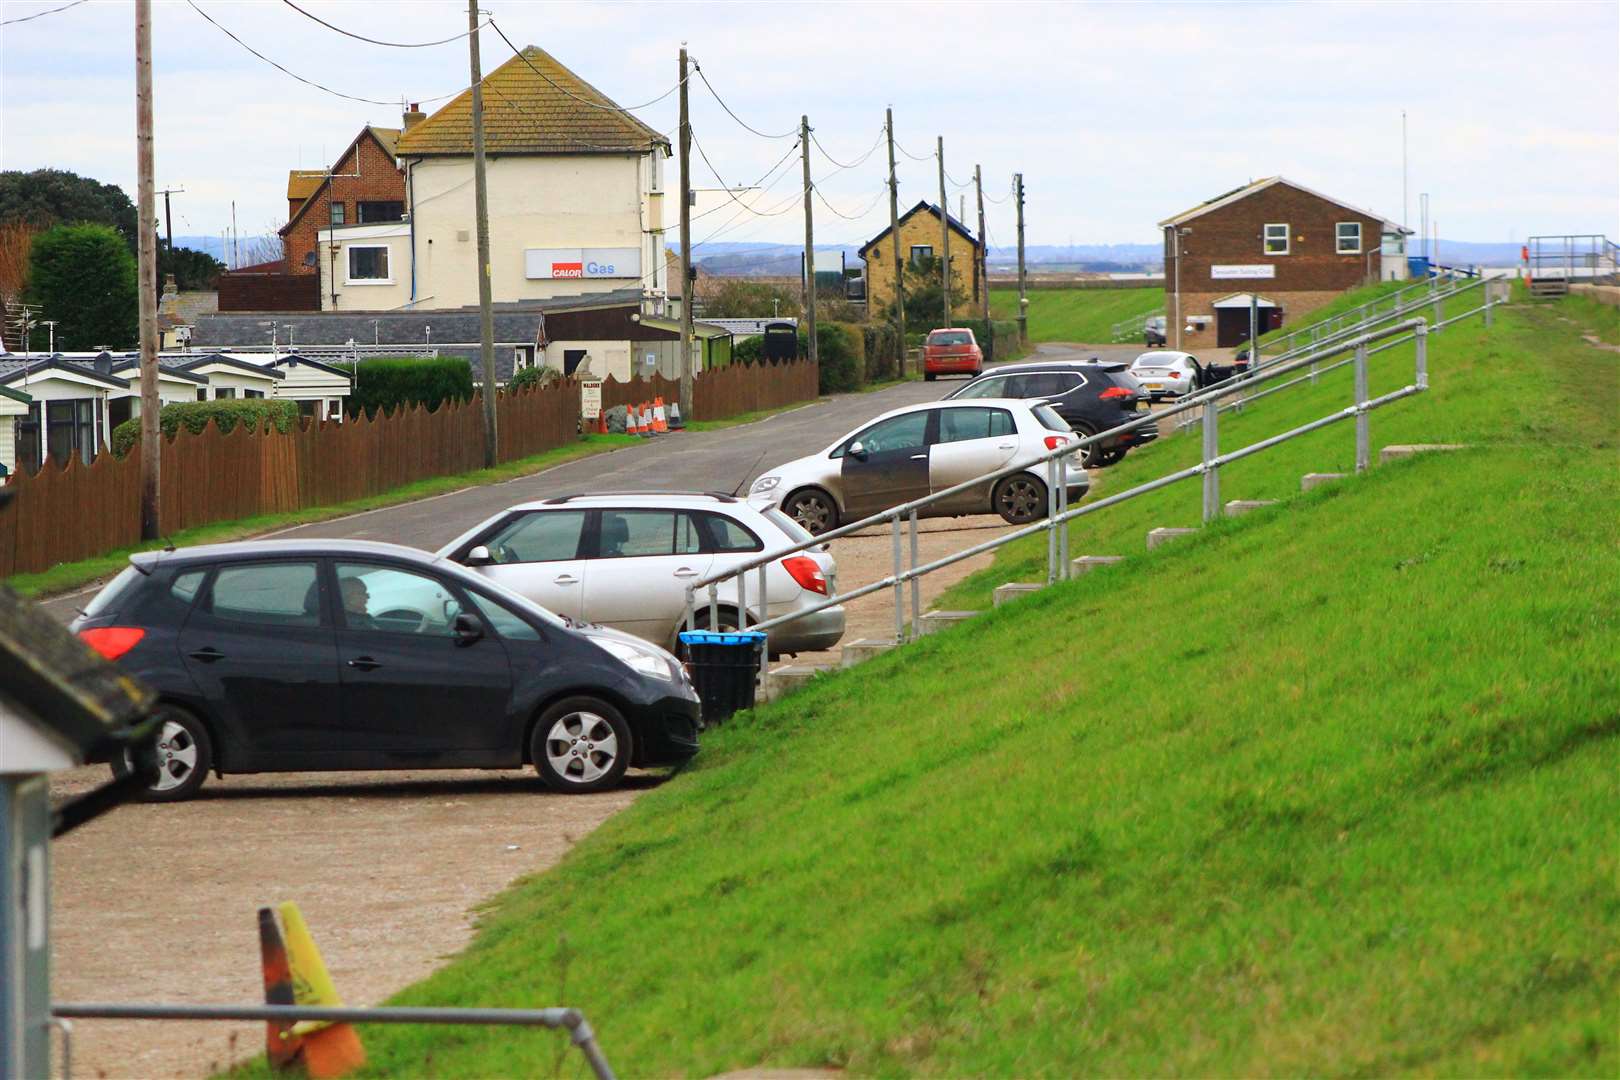 Those using the council's car park in Seasalter now have to pay via the RingGo app